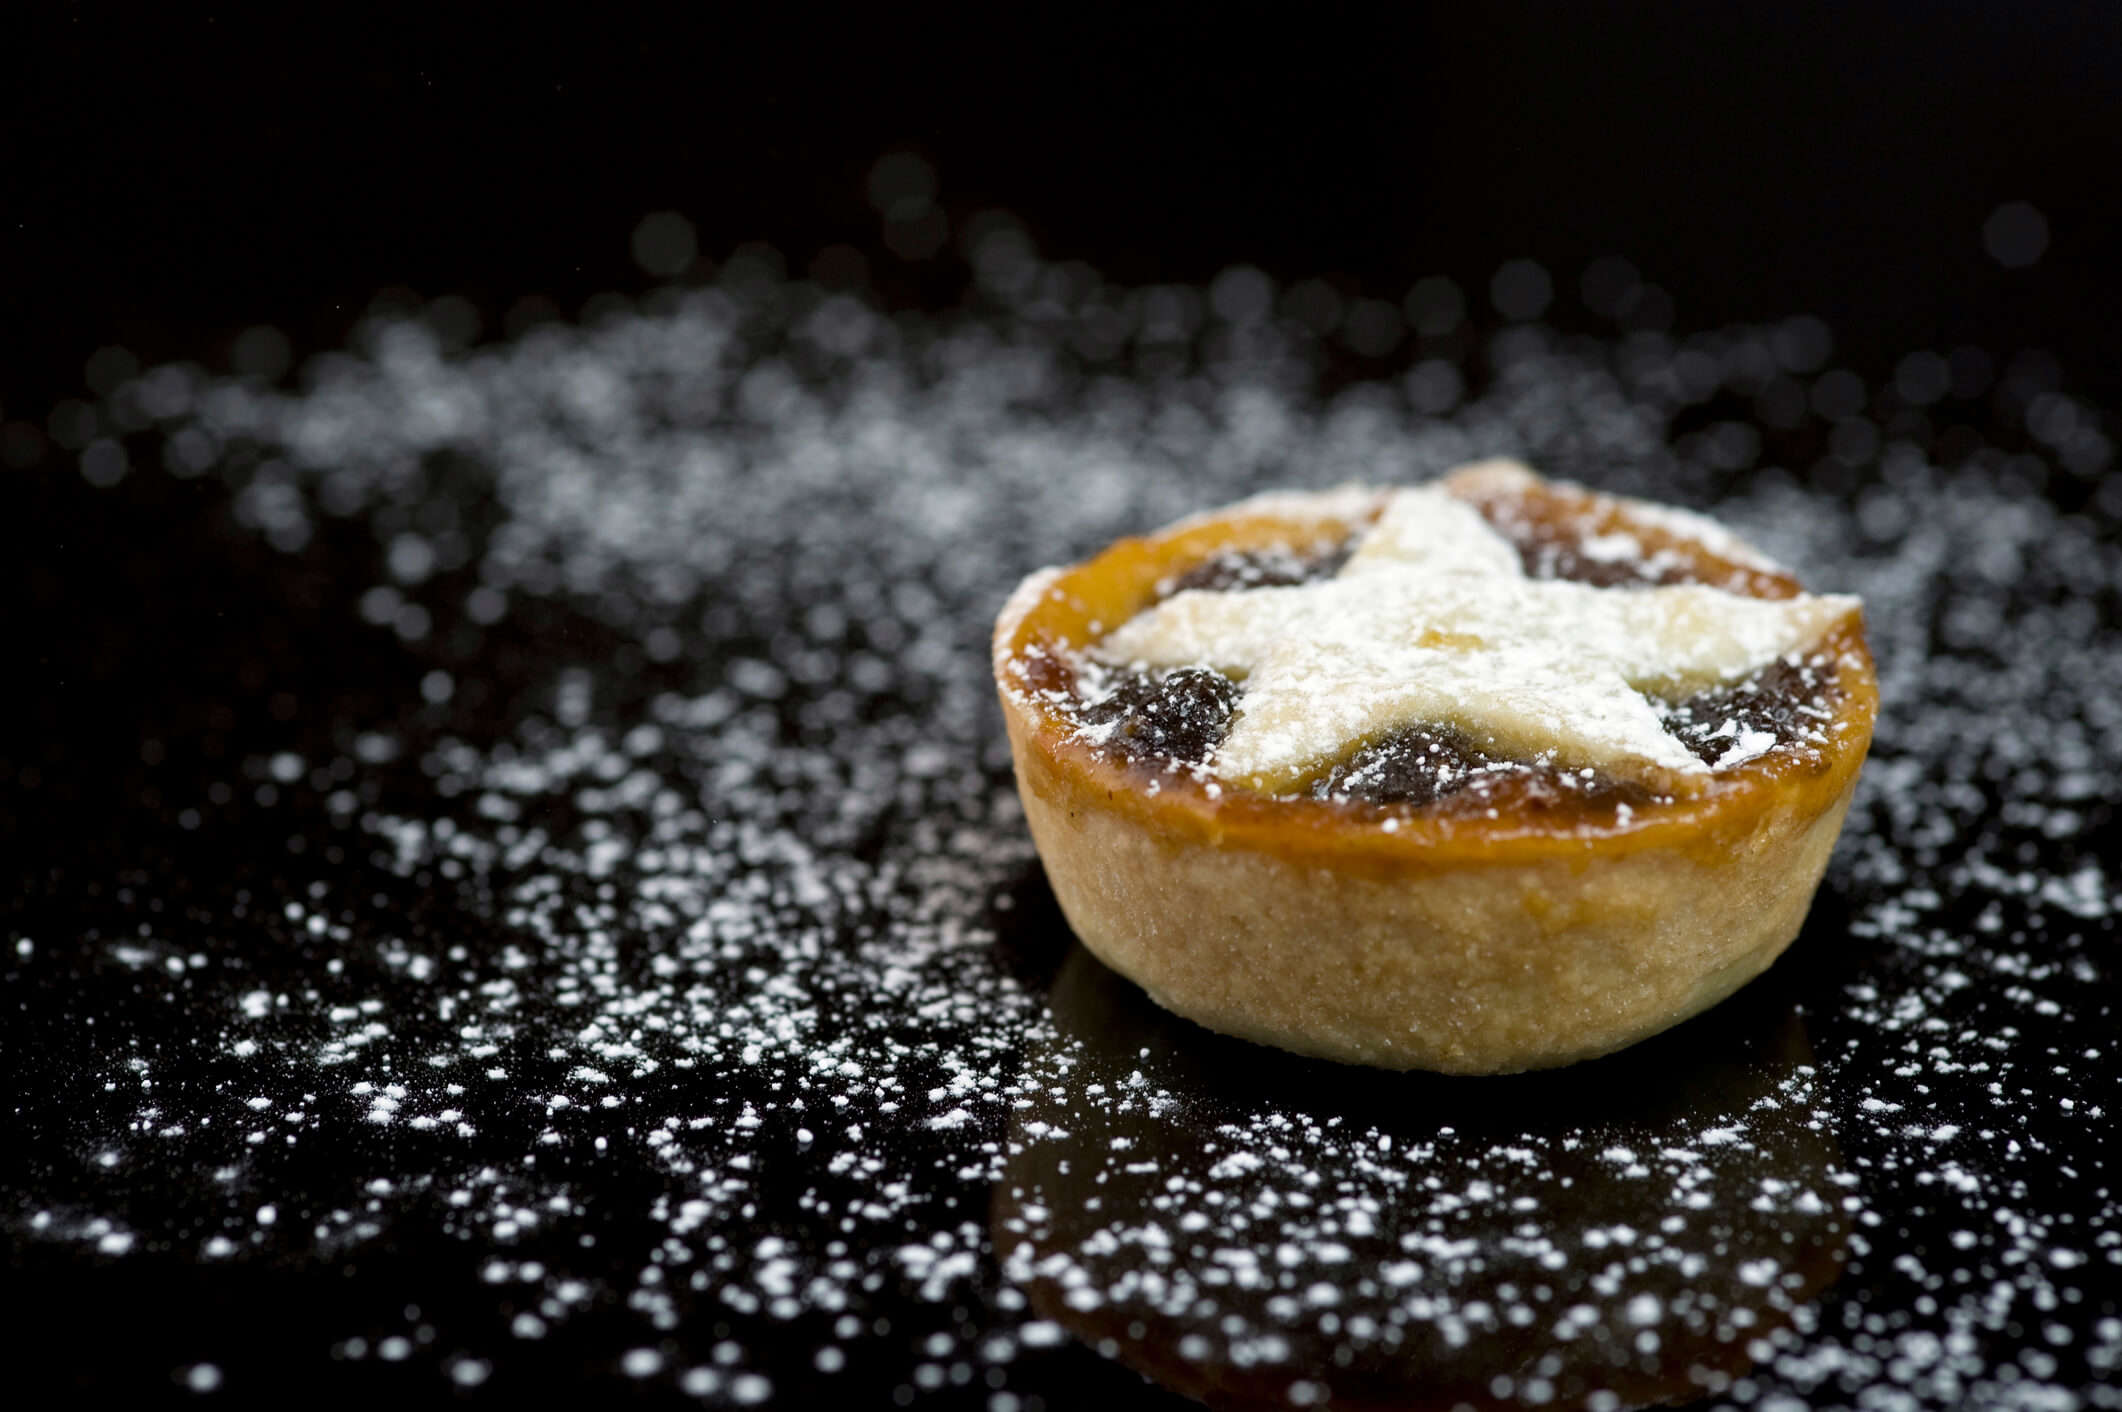 a close up of a mini mince pie with a star shaped top dusted with icing sugar